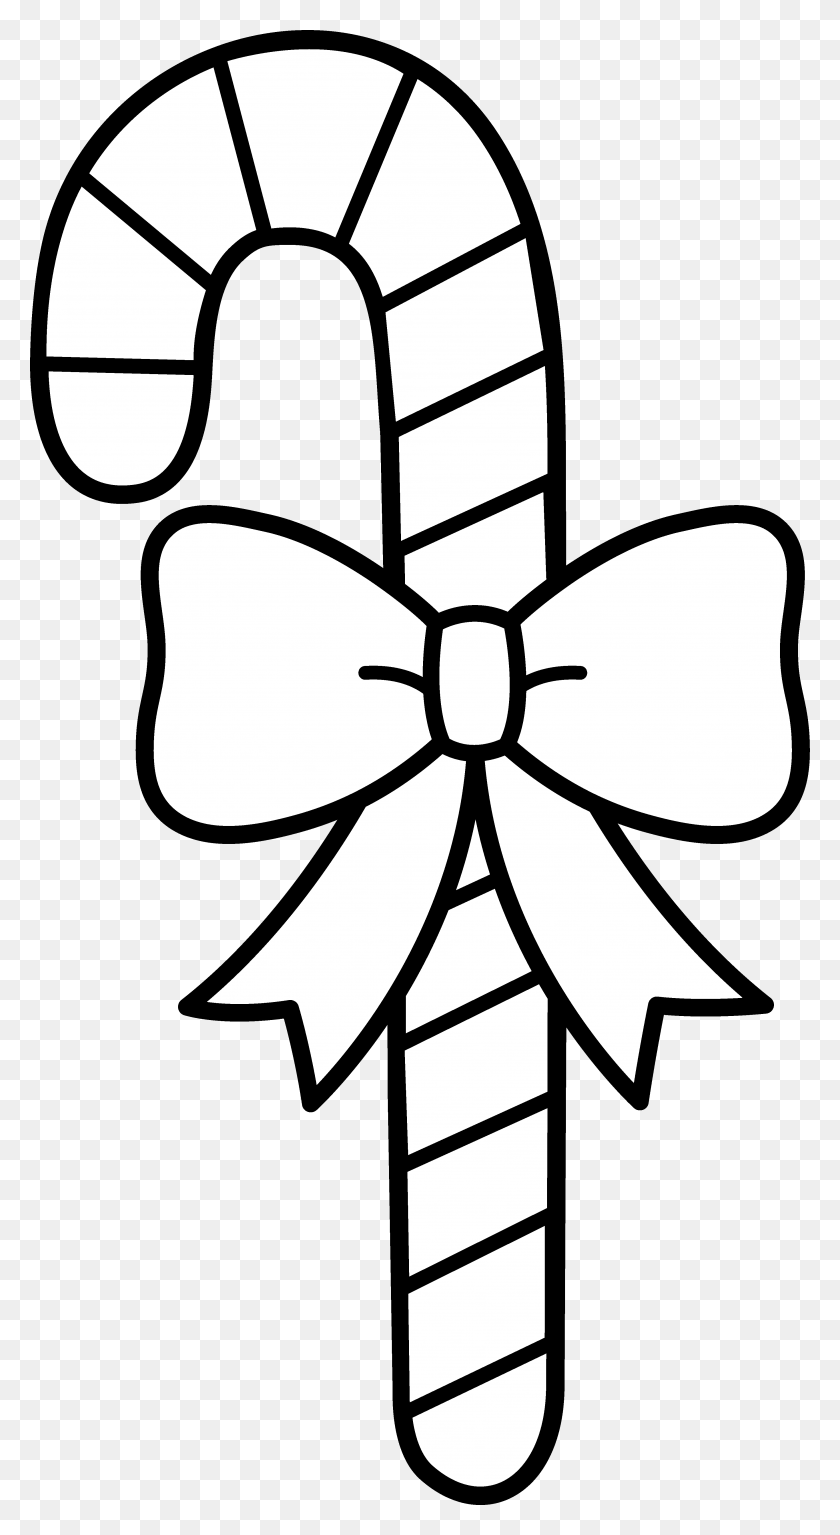 3509x6636 Candy Cane Pictures To Color - Fnaf Clipart Black And White